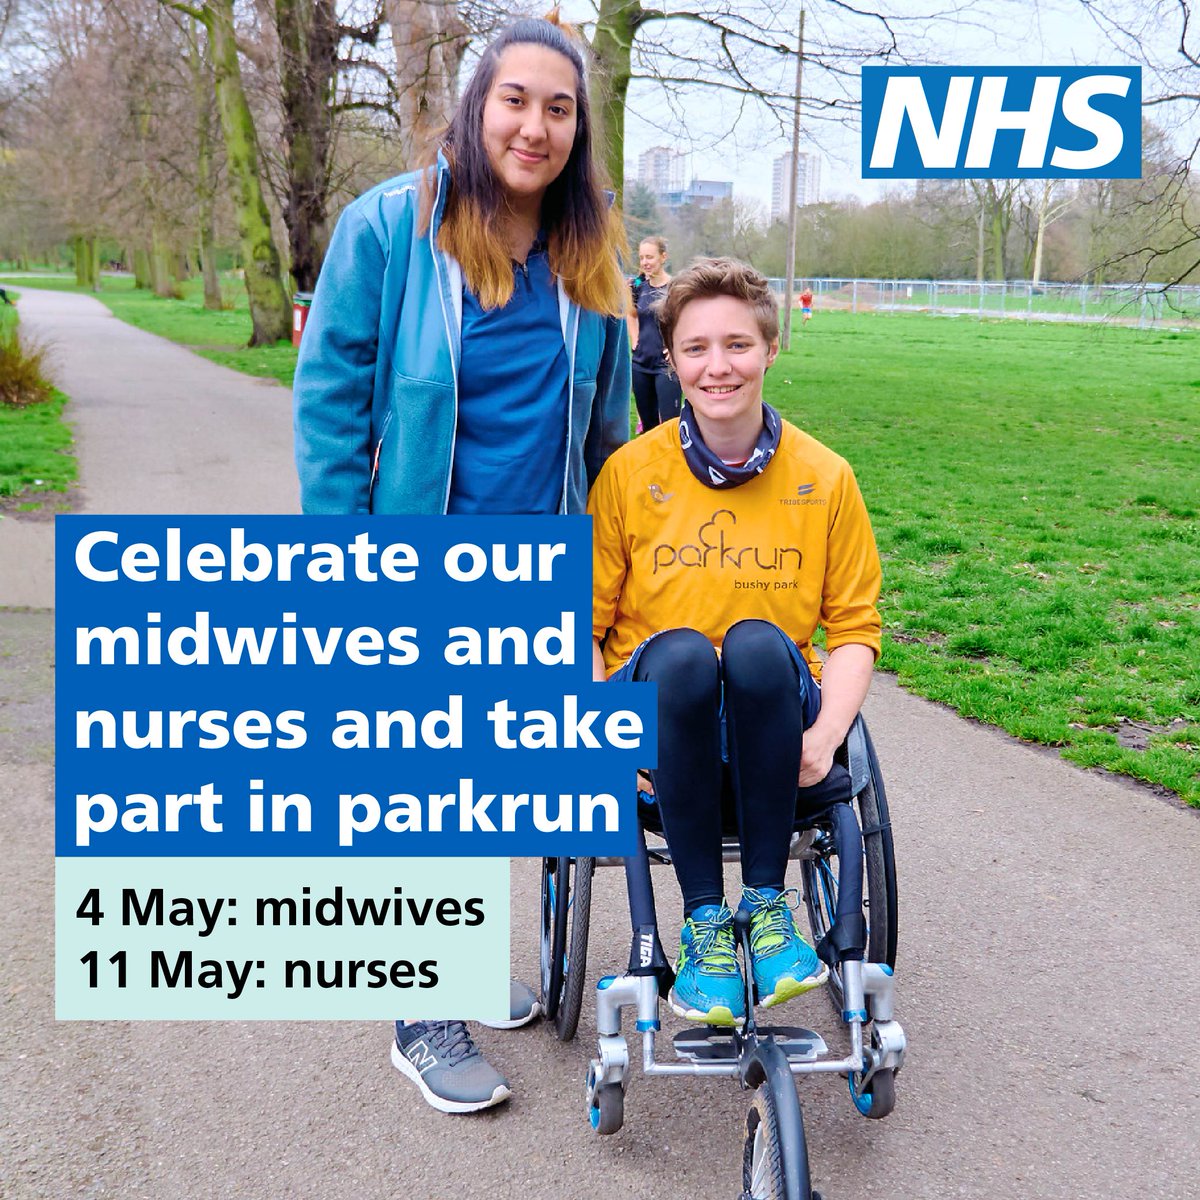 Take part in a local parkrun on 4 May to mark International Day of the Midwife #IDM2024 and 11 May for International Nurses Day #IND2024. You can walk, jog, run or volunteer as we recognise and thank our midwives and nurses across #southeastLondon